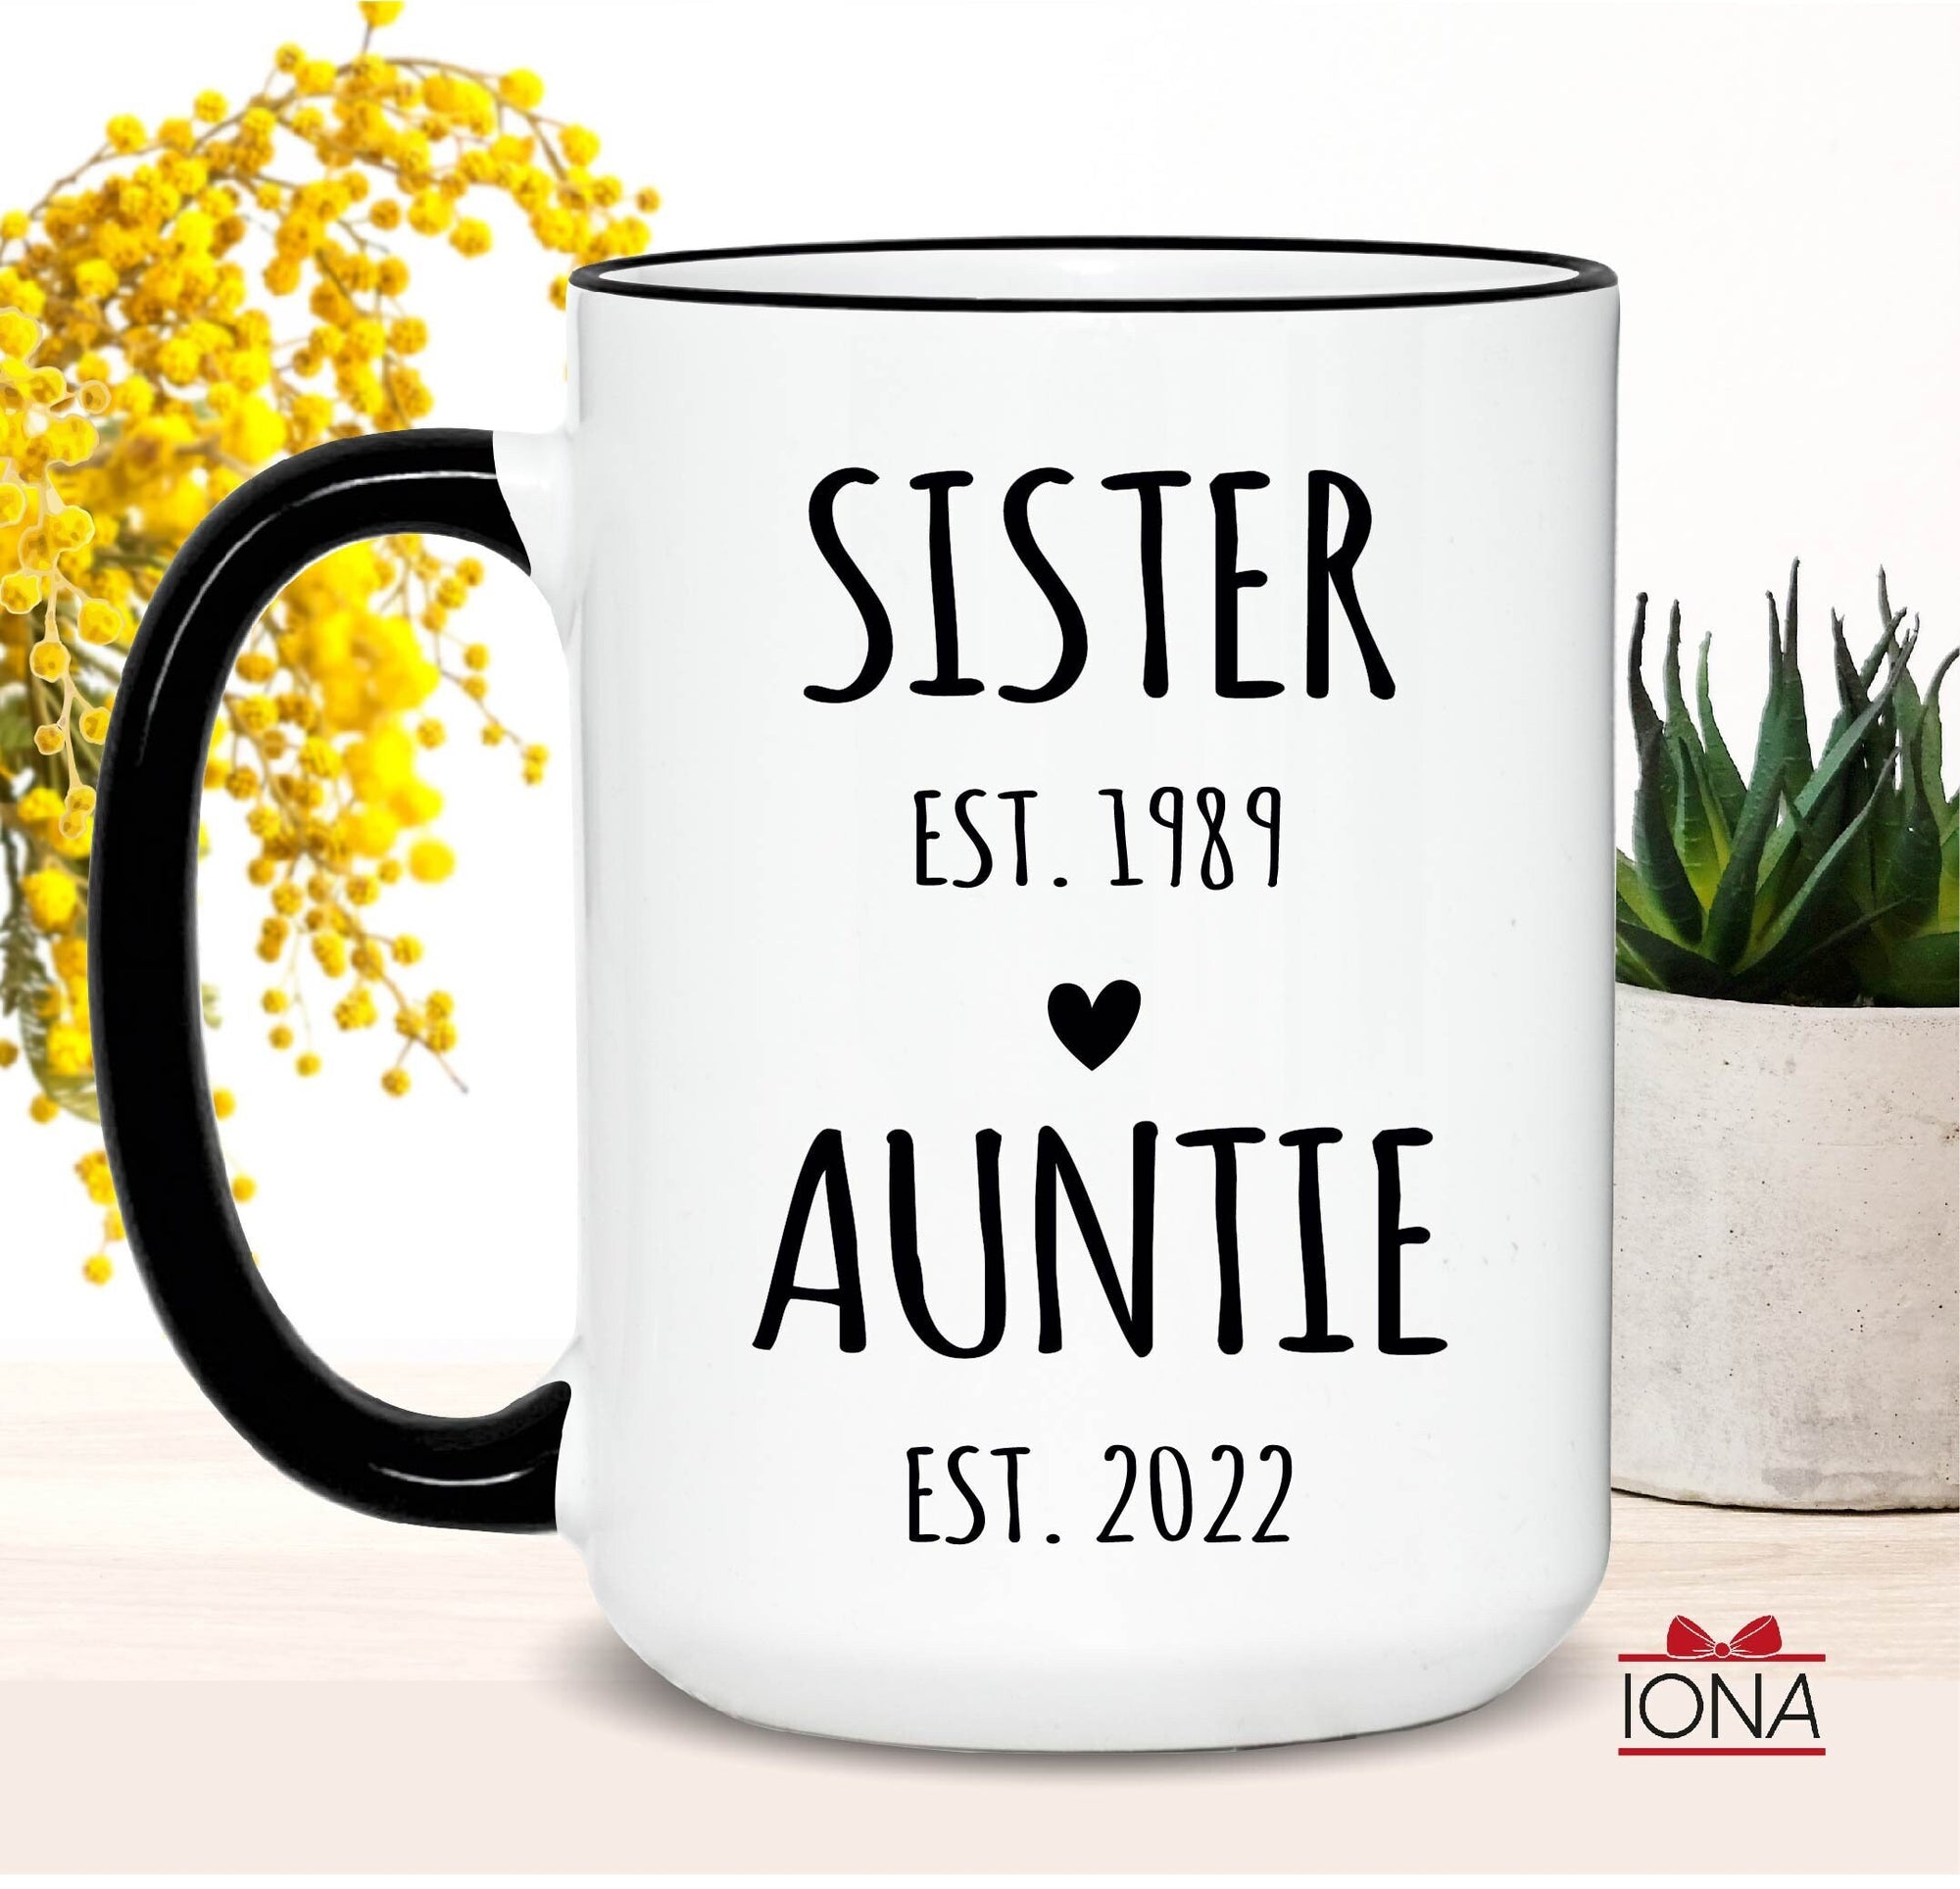 Pregnancy Announcement, New Aunt Gift, Auntie Coffee Mug, Custom Aunt Gift, Promoted to Aunt Mug, Future Aunt Gift, Aunt To Be, Est. 2022